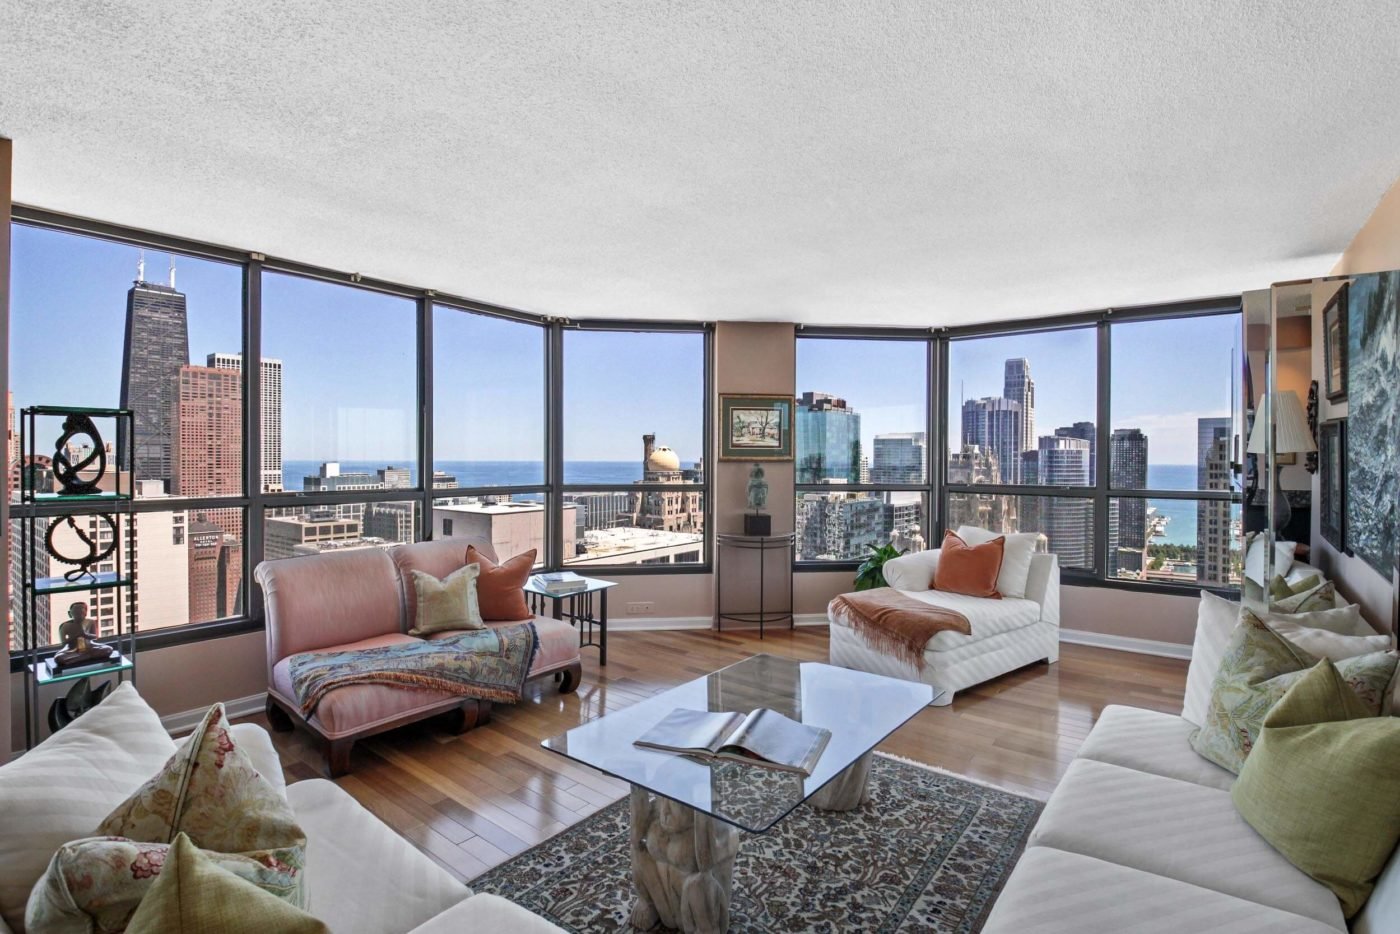 Real estate picture of a living room with amazing views in an apartment for sale